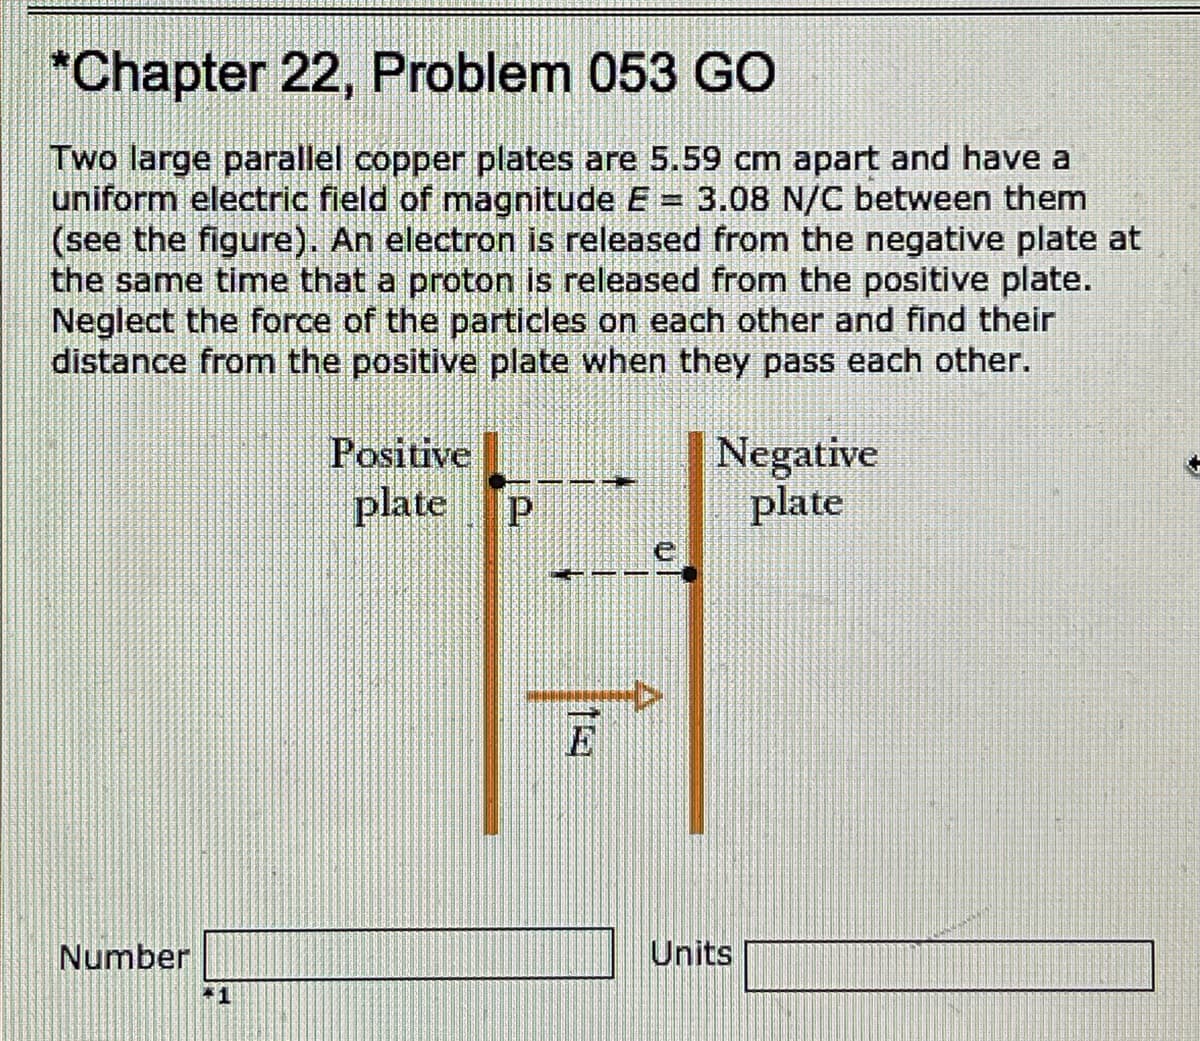 *Chapter 22, Problem 053 GO
Two large parallel copper plates are 5.59 cm apart and have a
uniform electric field of magnitude E = 3.08 N/C between them
(see the figure). An electron is released from the negative plate at
the same time that a proton is released from the positive plate.
Neglect the force of the particles on each other and find their
distance from the positive plate when they pass each other.
Positive
plate
Negative
plate
E
Number
Units
+1
